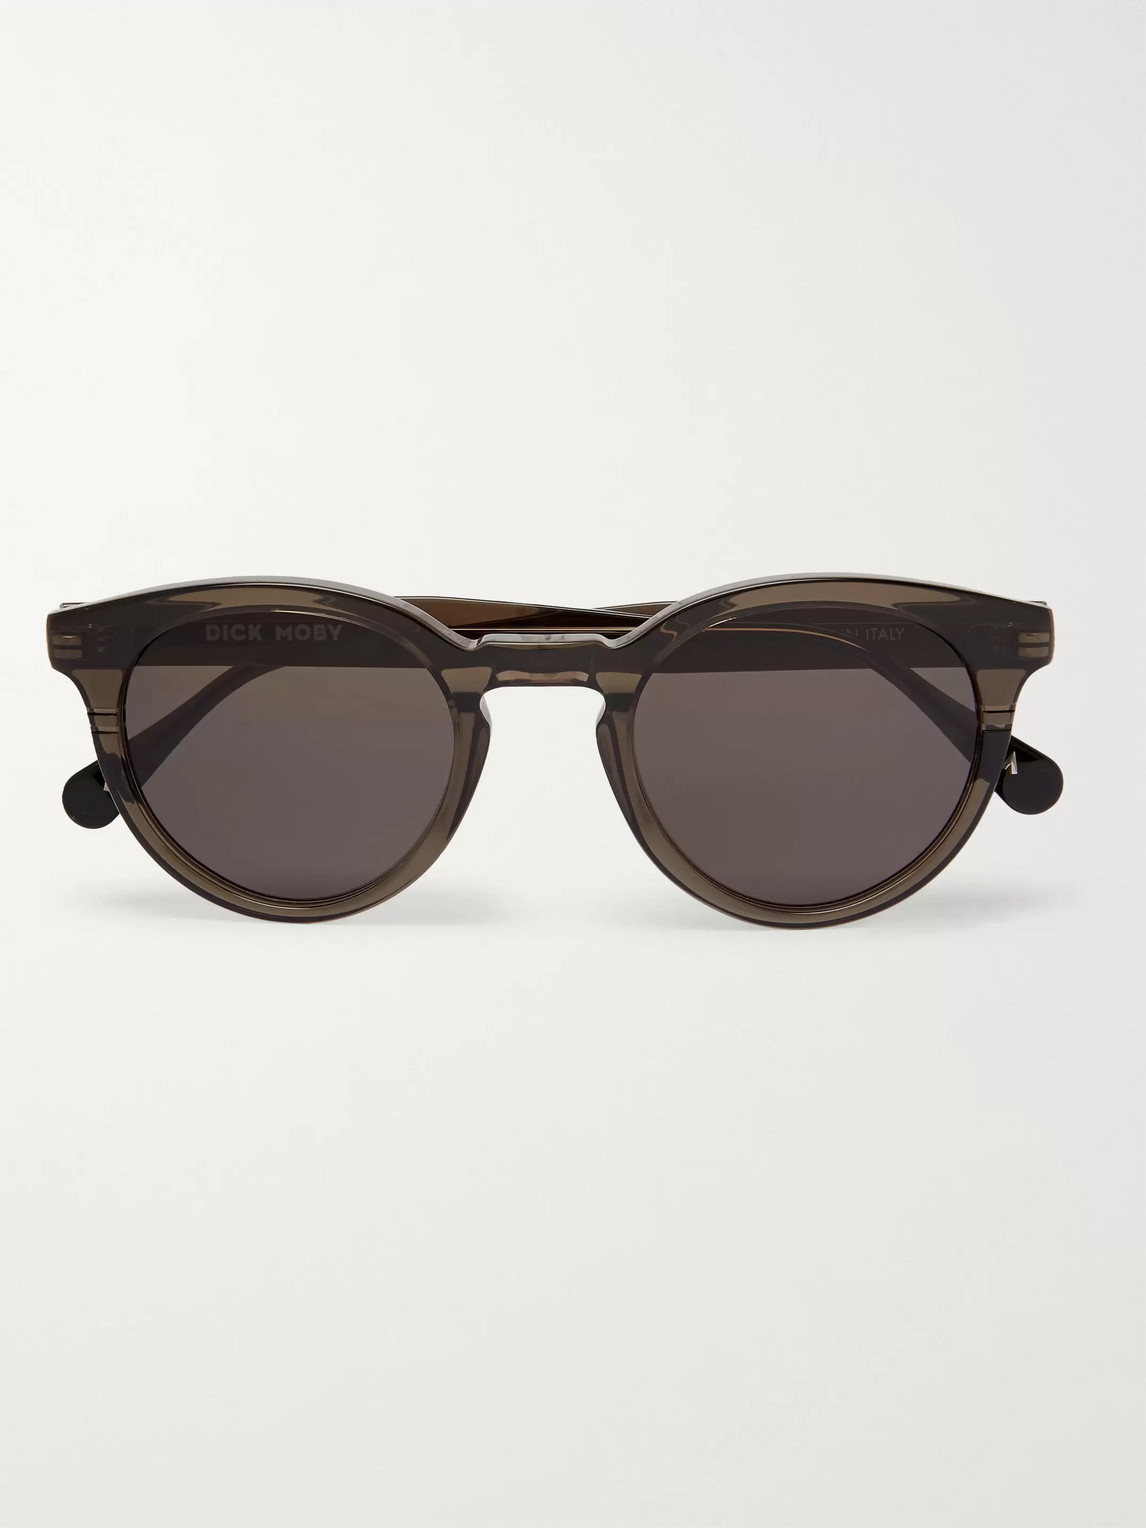 Dick Moby Bristol Round-frame Acetate Sunglasses In Green